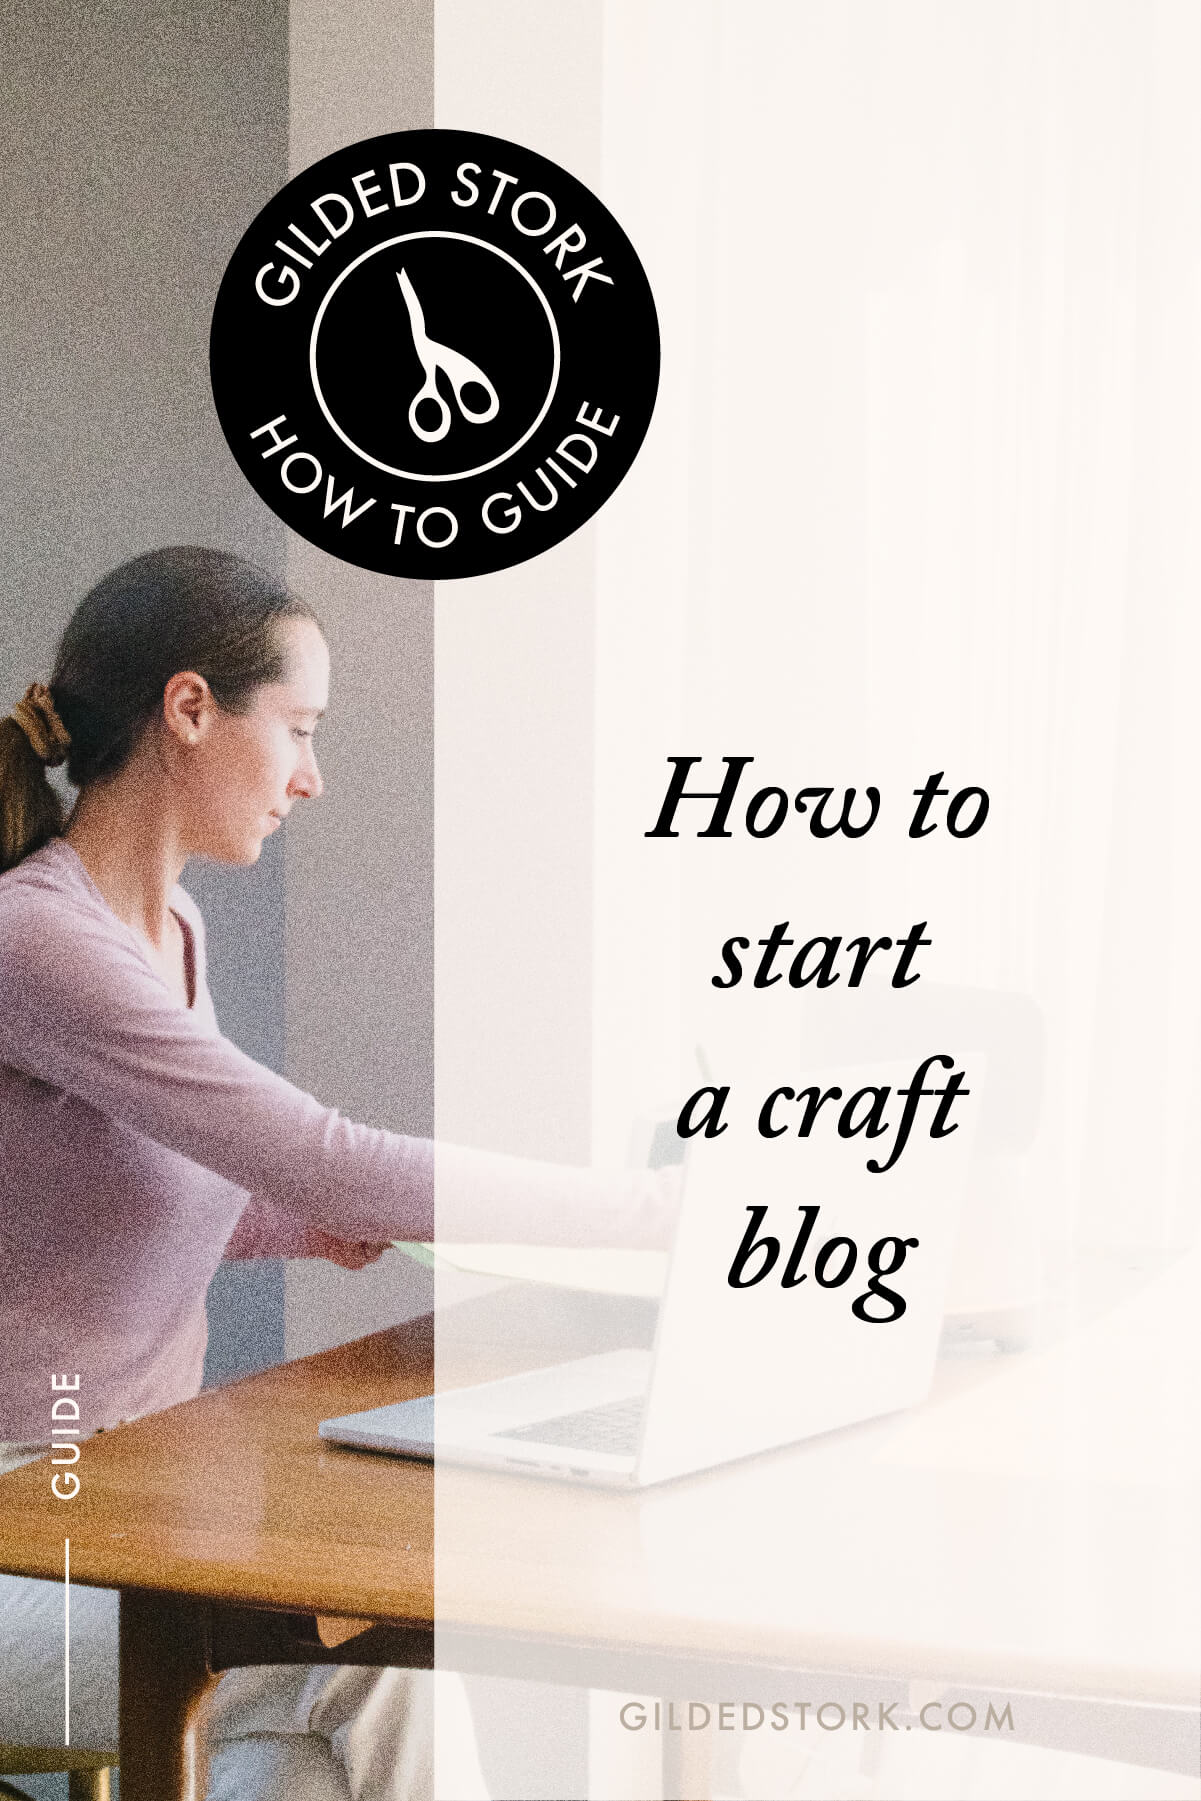 The ultimate beginner's guide to starting your own craft blog.